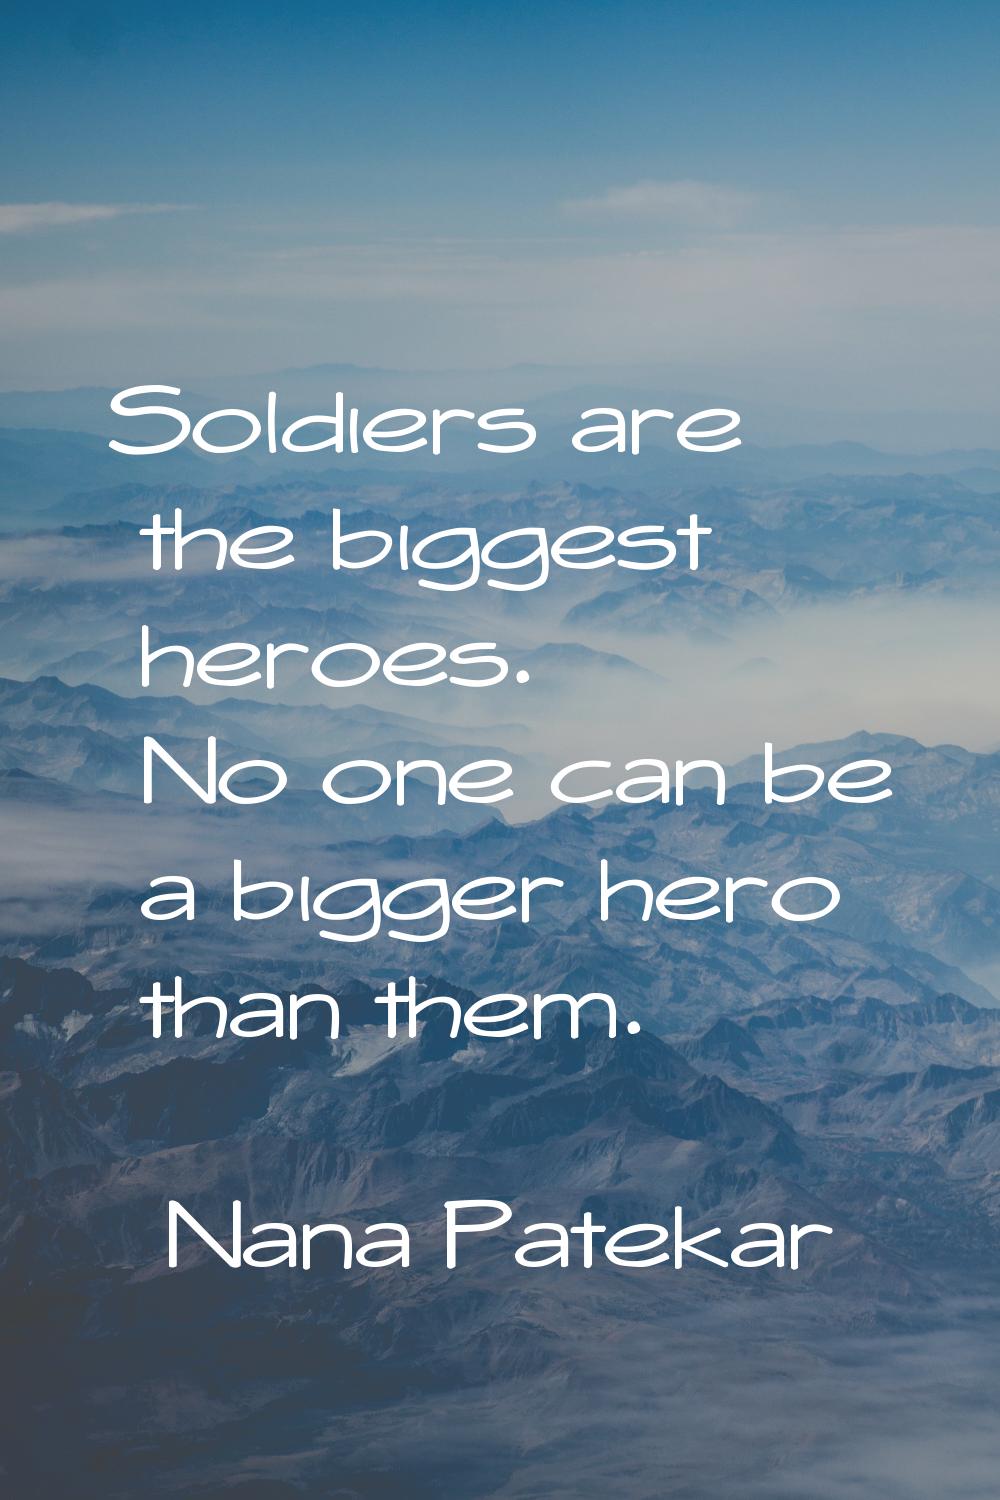 Soldiers are the biggest heroes. No one can be a bigger hero than them.